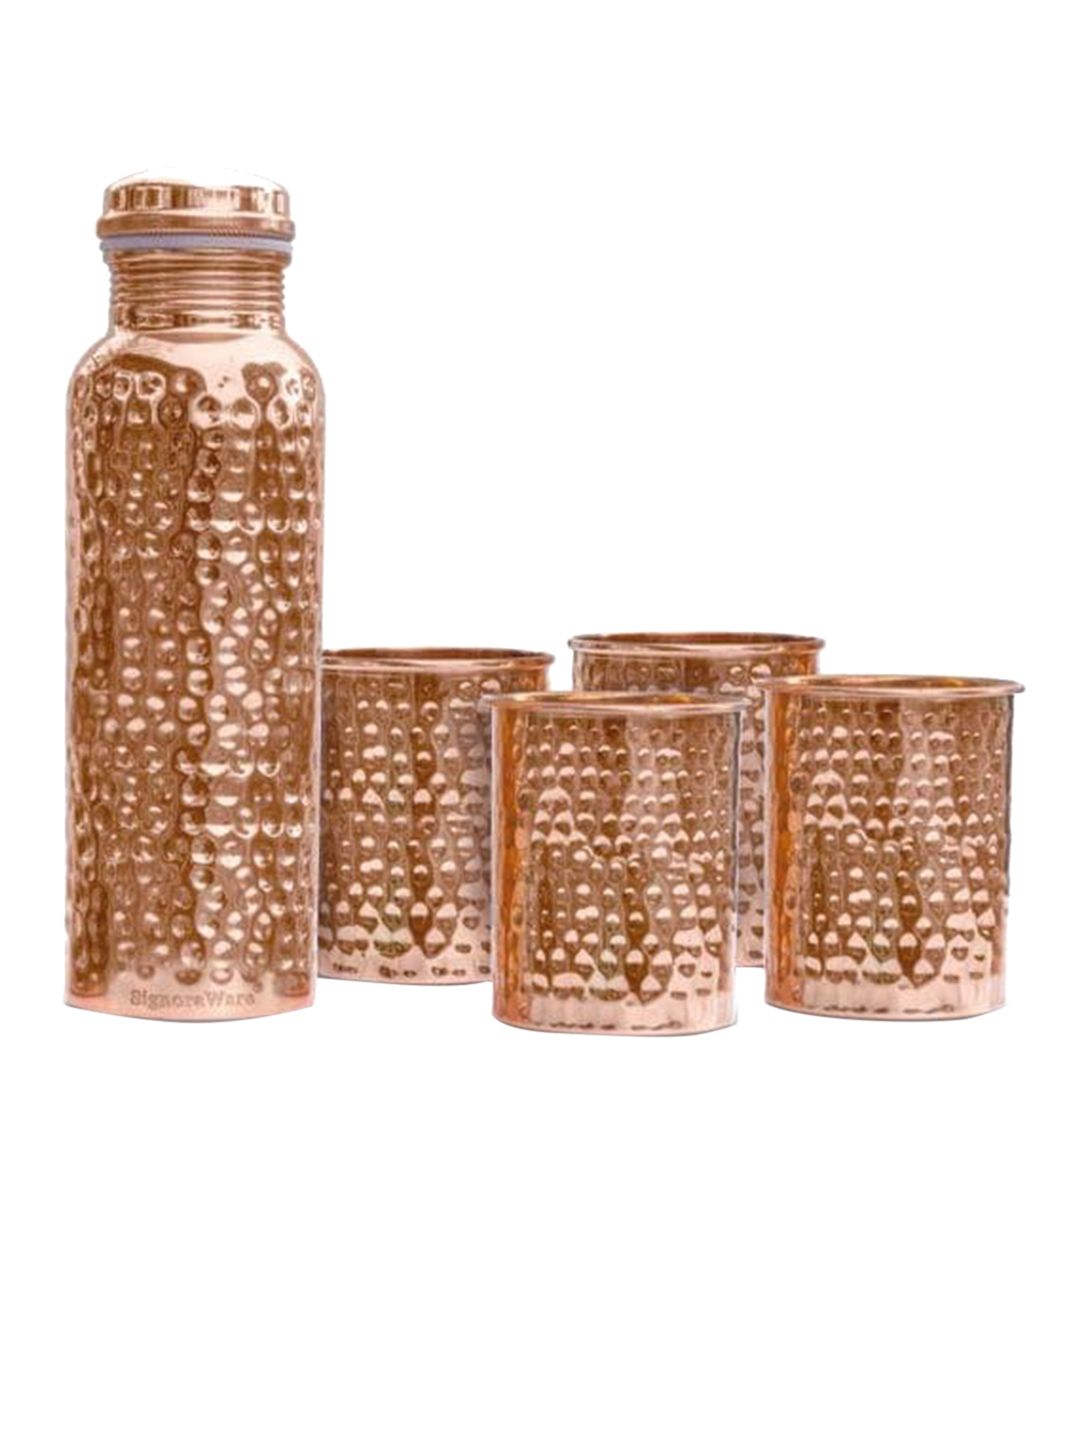 SignoraWare Bronze Set of 5 Textured Bottle with Glasses Set Price in India